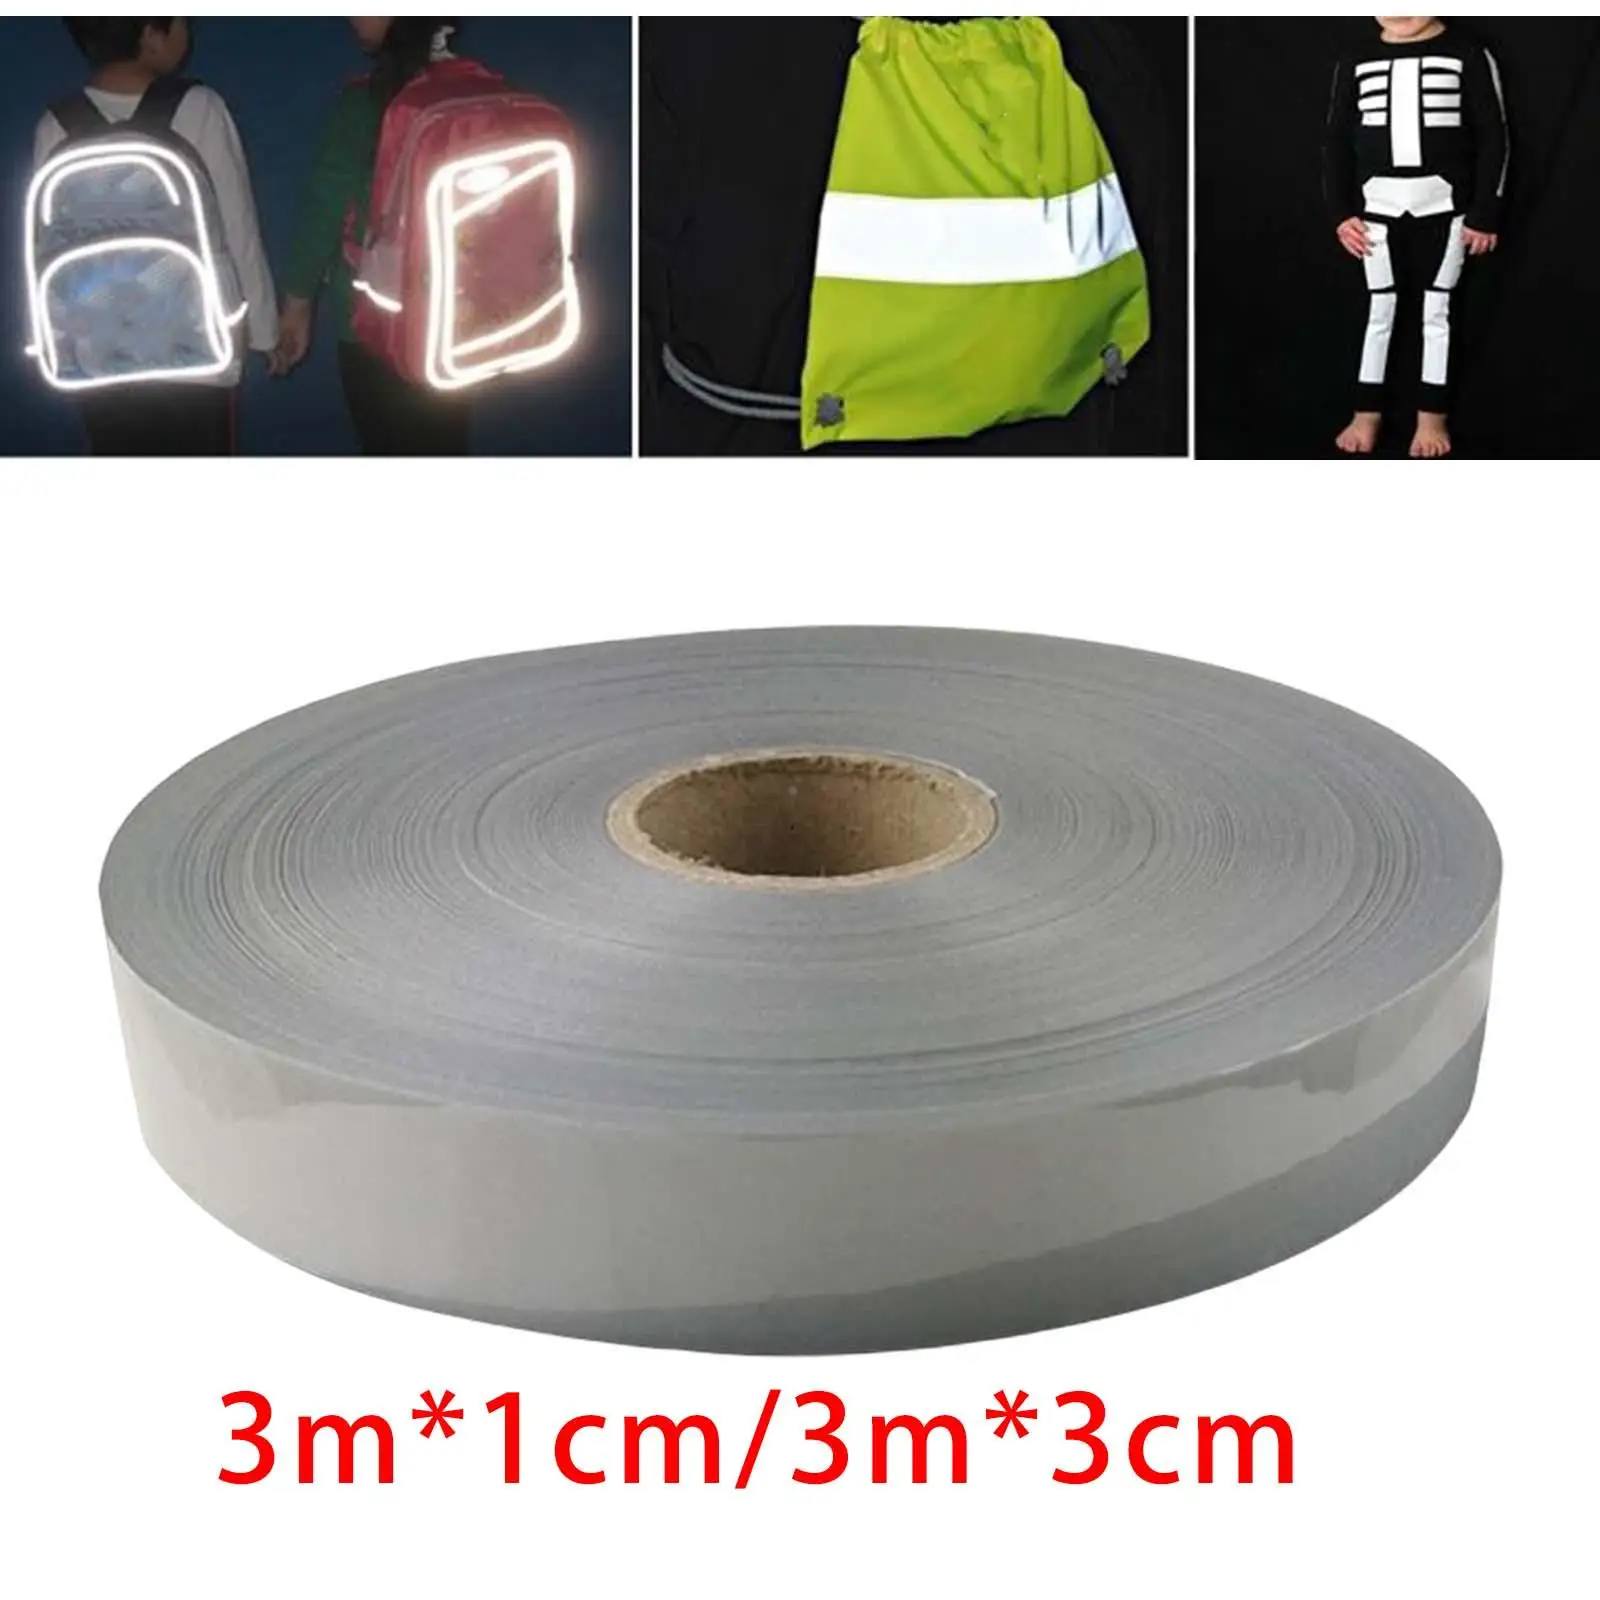 Iron On Reflective Tape High Visibility Heat Transfer Vinyl Fabric Reflective Material Warning Belt Premium for Clothing Outdoor